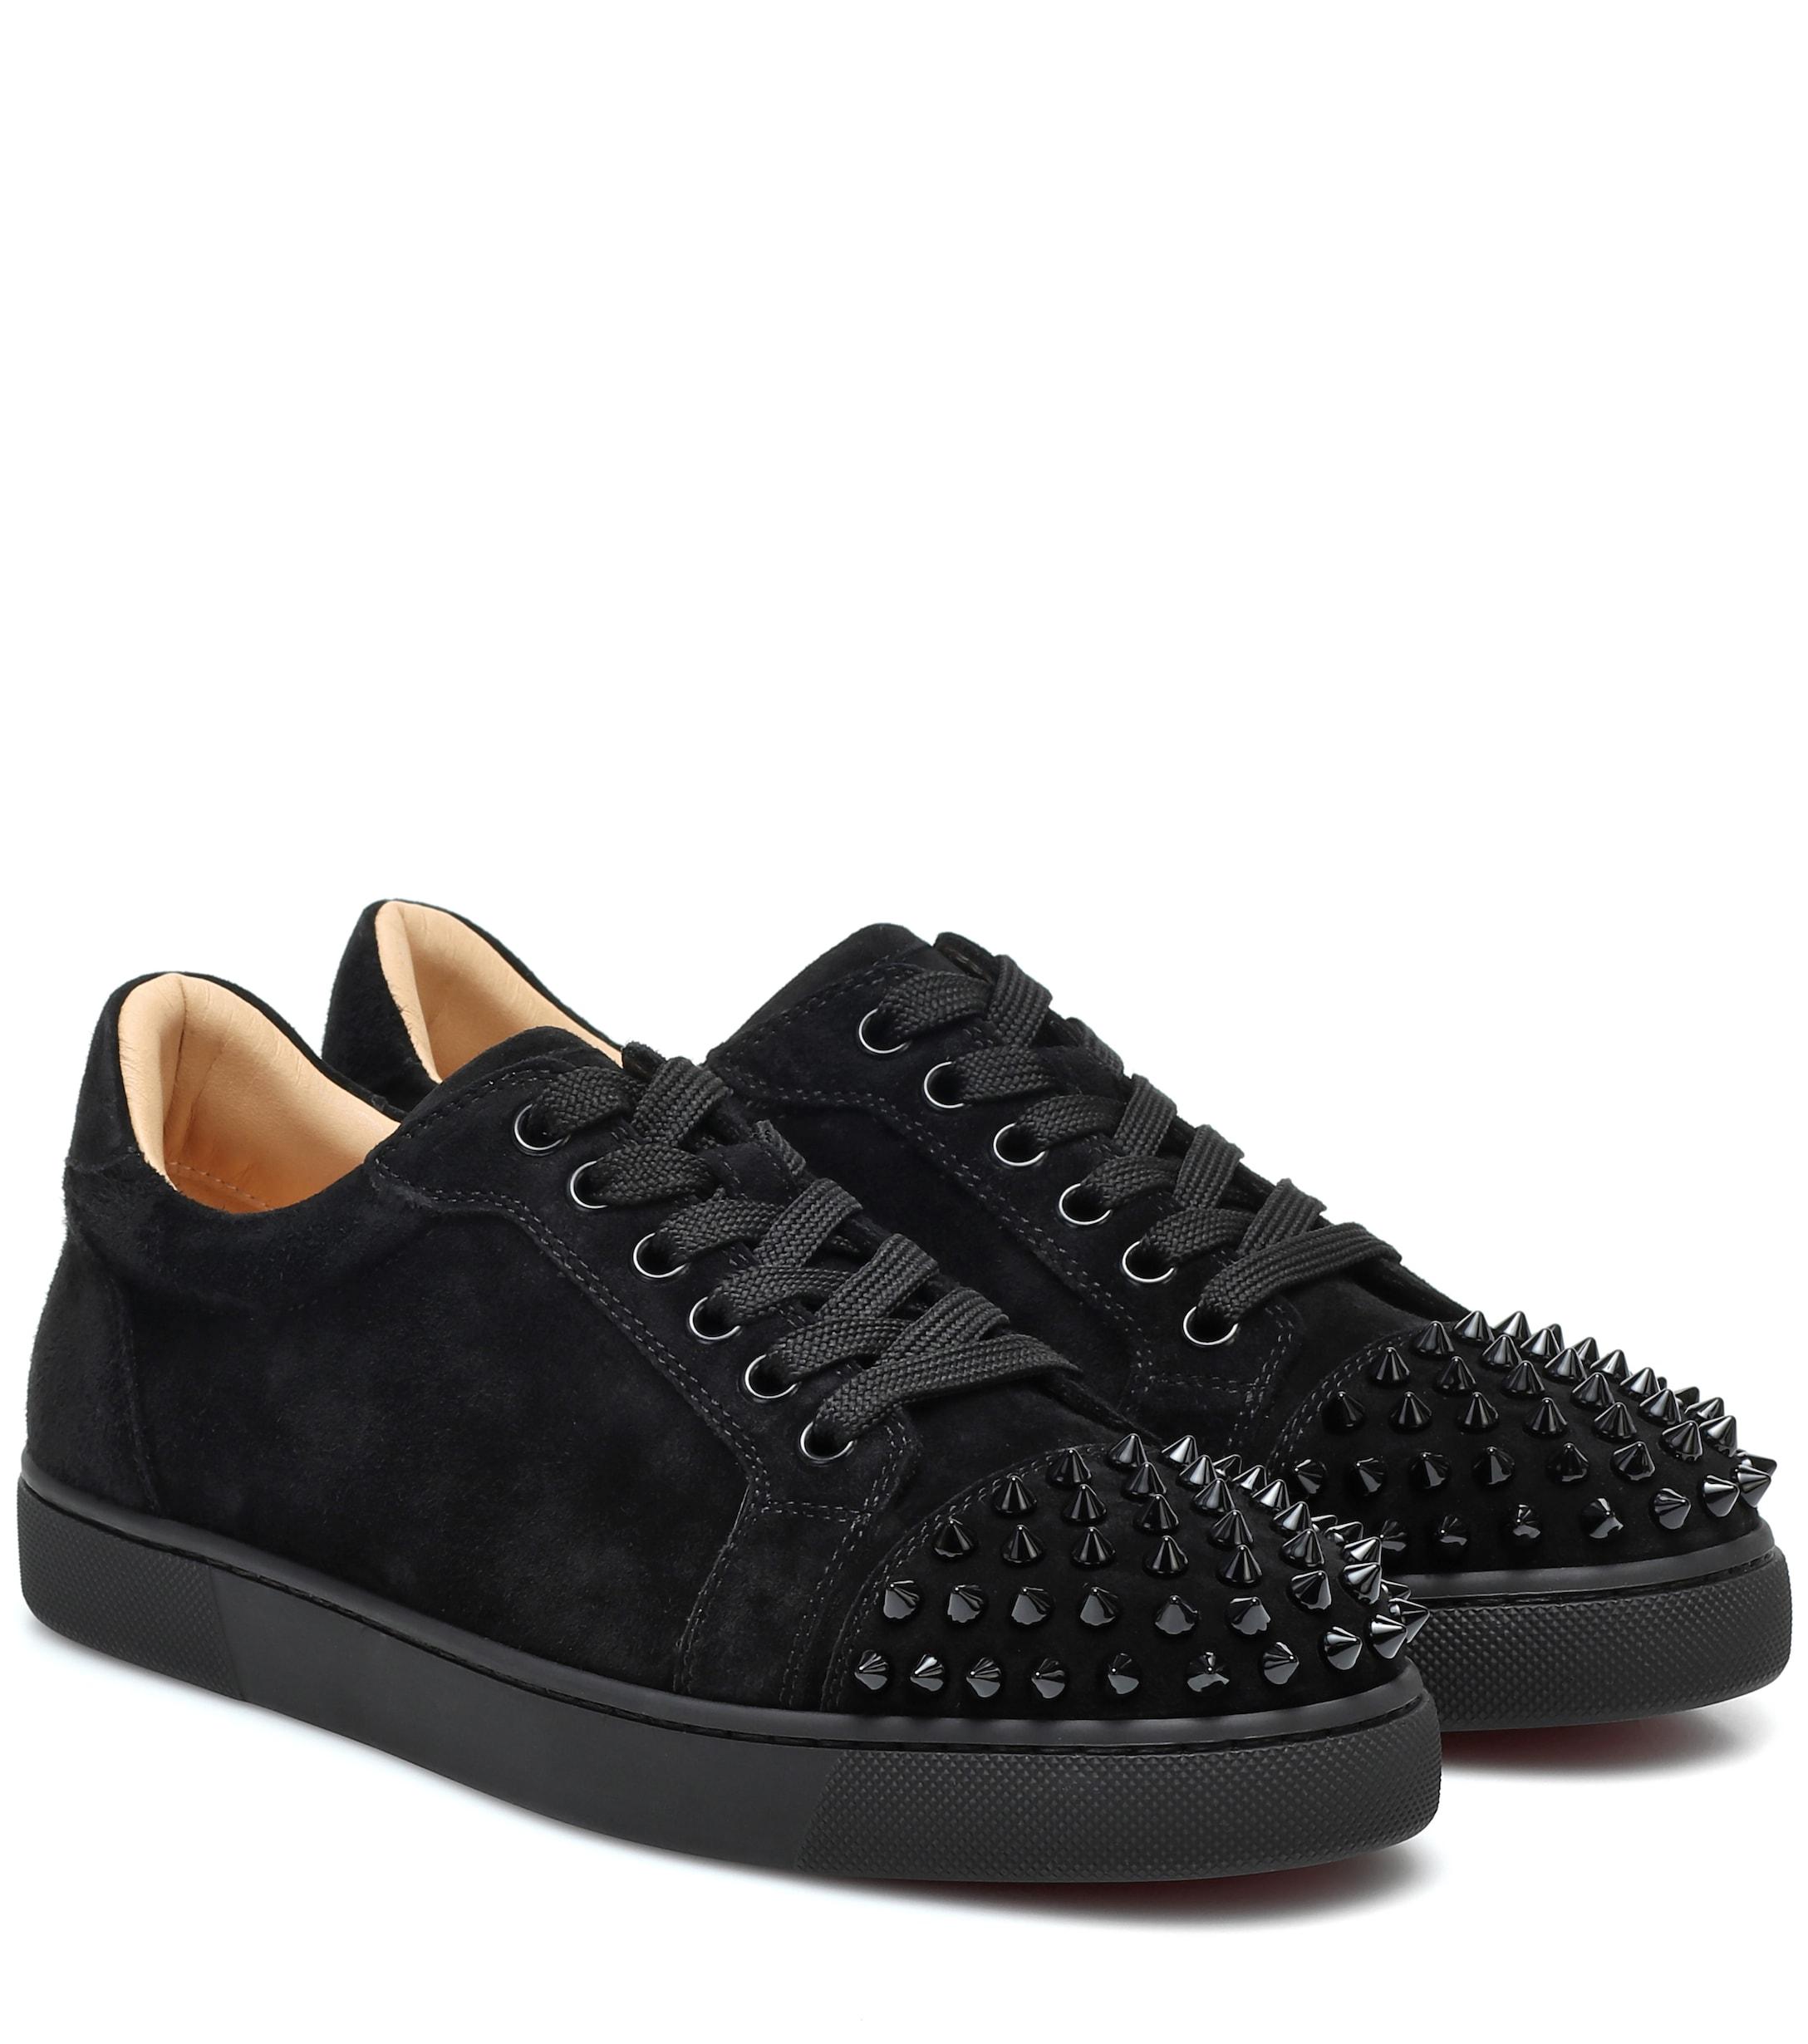 Christian Louboutin Vieira Spikes Suede Sneakers in Black - Lyst